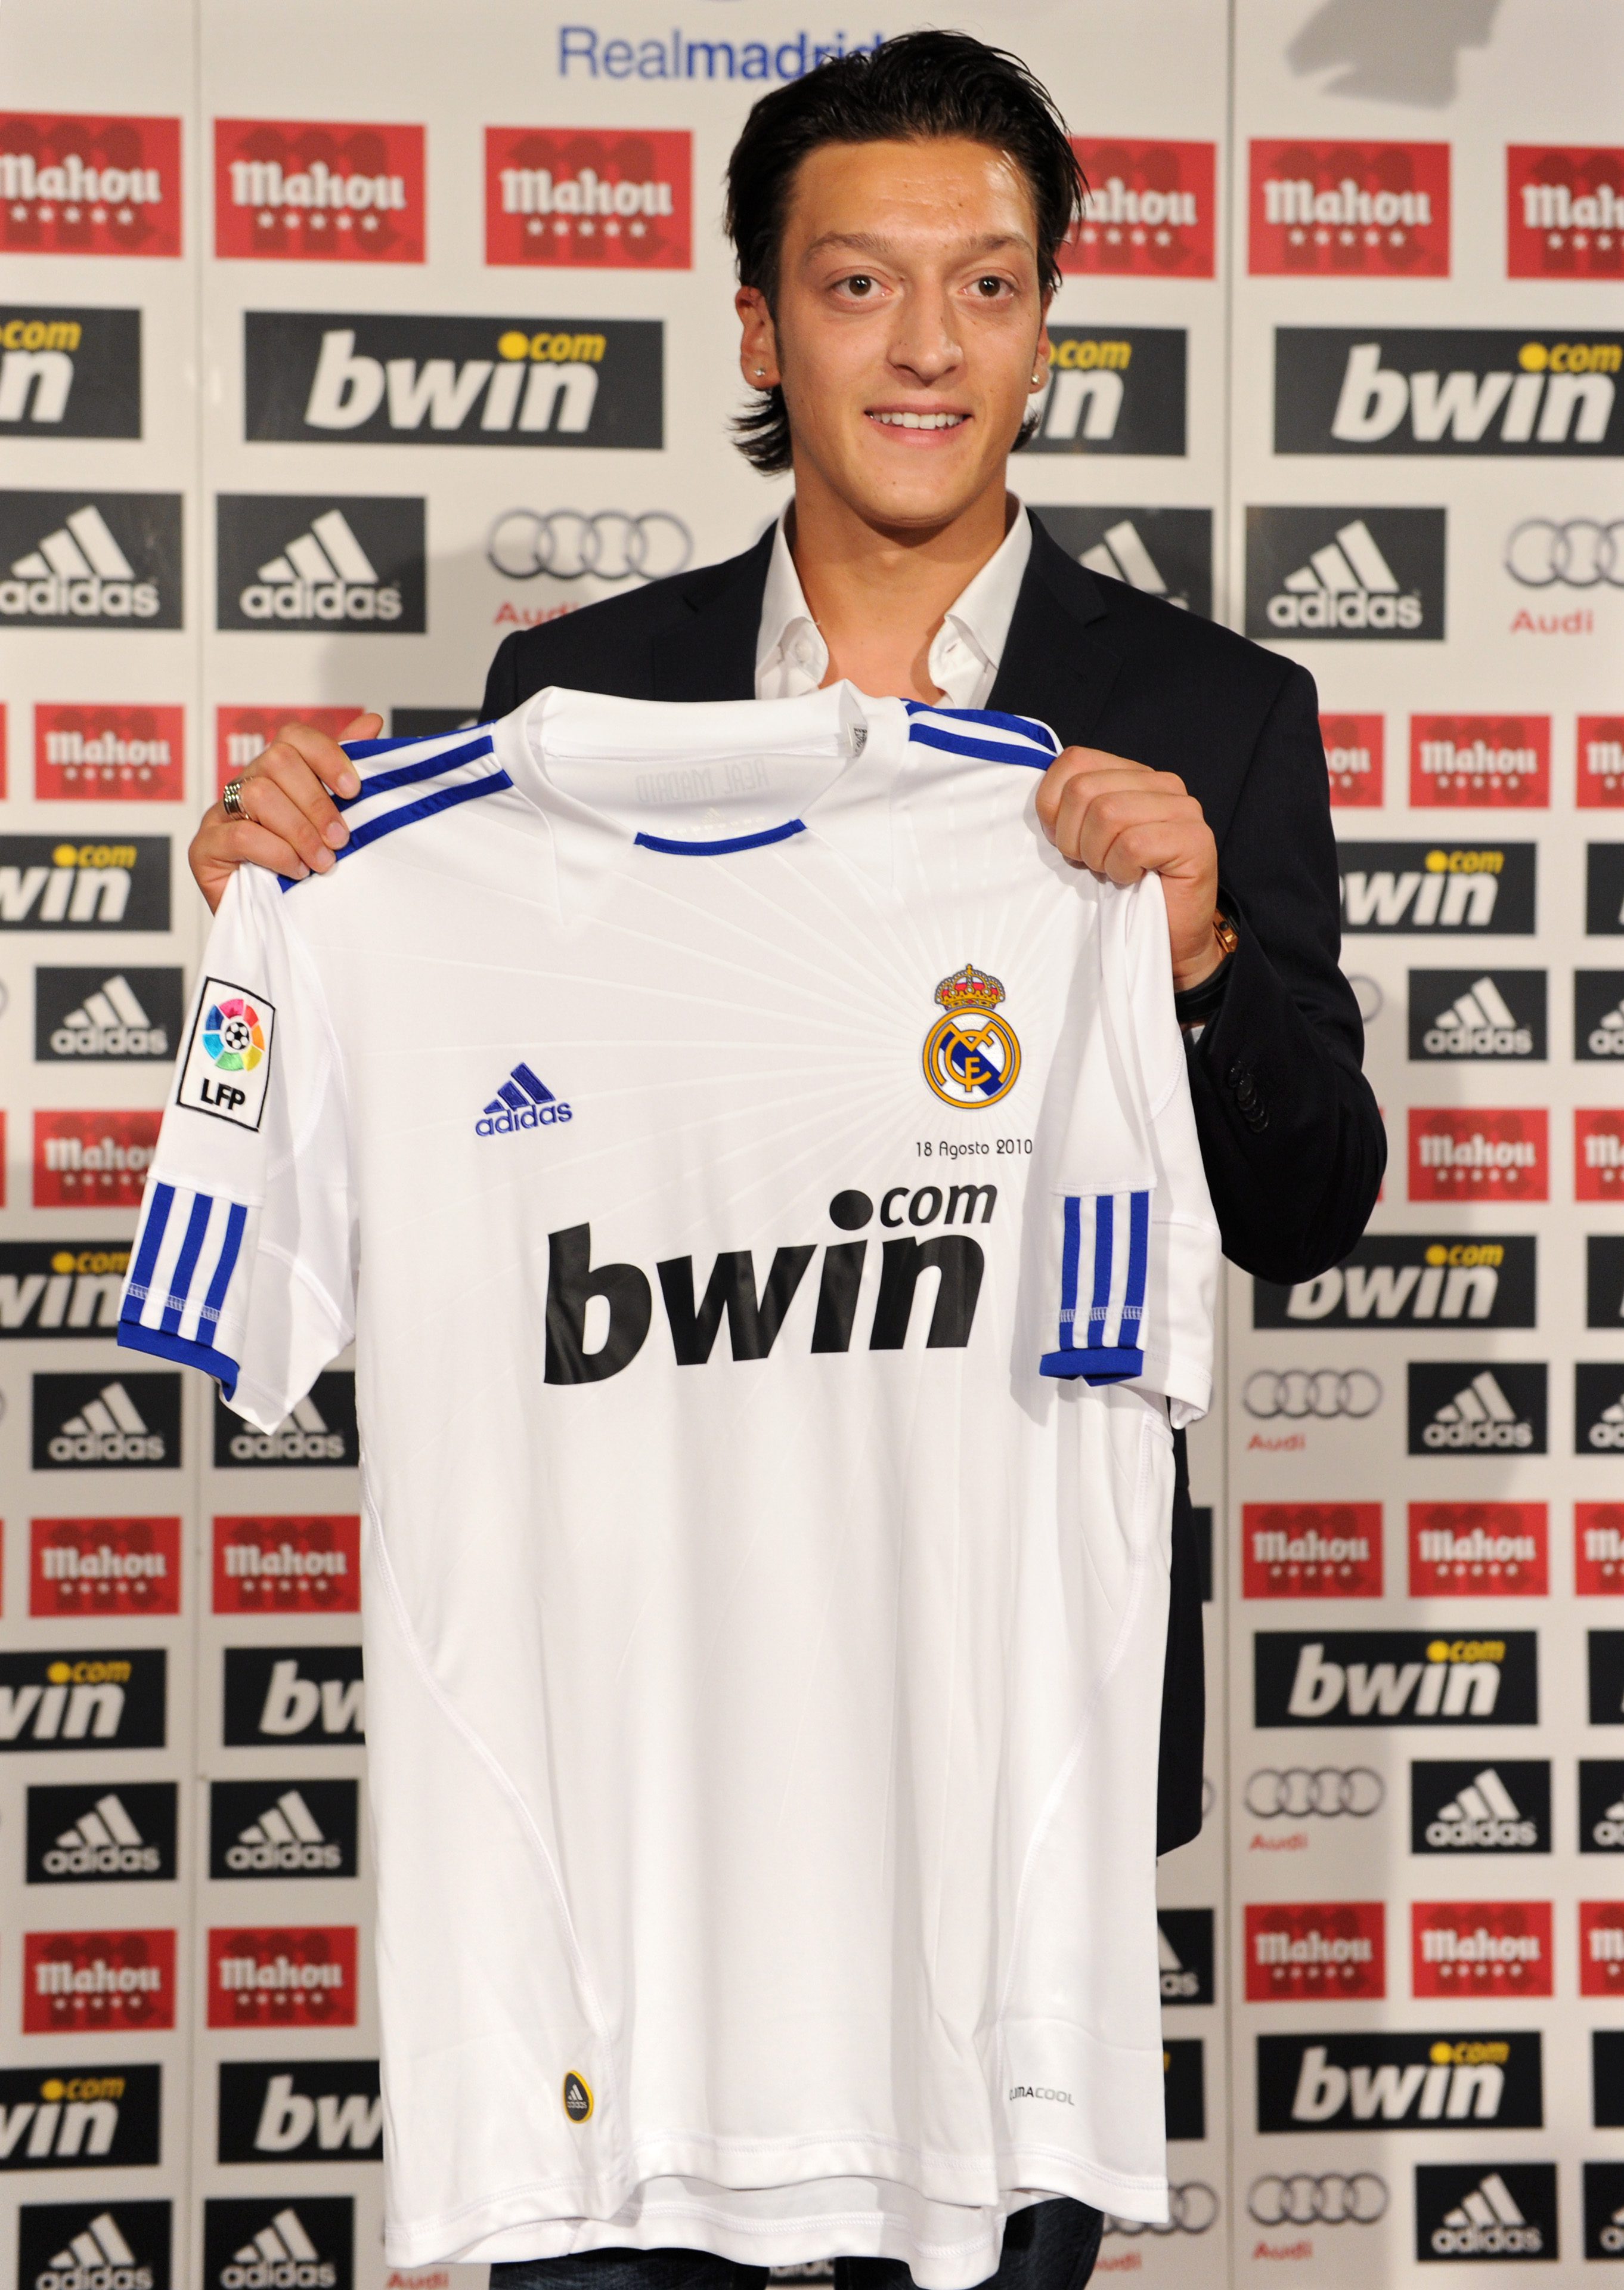 MADRID, SPAIN - AUGUST 18:  New signing Mesut Ozil poses with a Real Madrid shirt during his presentation as new Real Madrid player at the Estadio Santiago Bernabeu on August 18, 2010 in Madrid, Spain.  (Photo by Jasper Juinen/Getty Images)